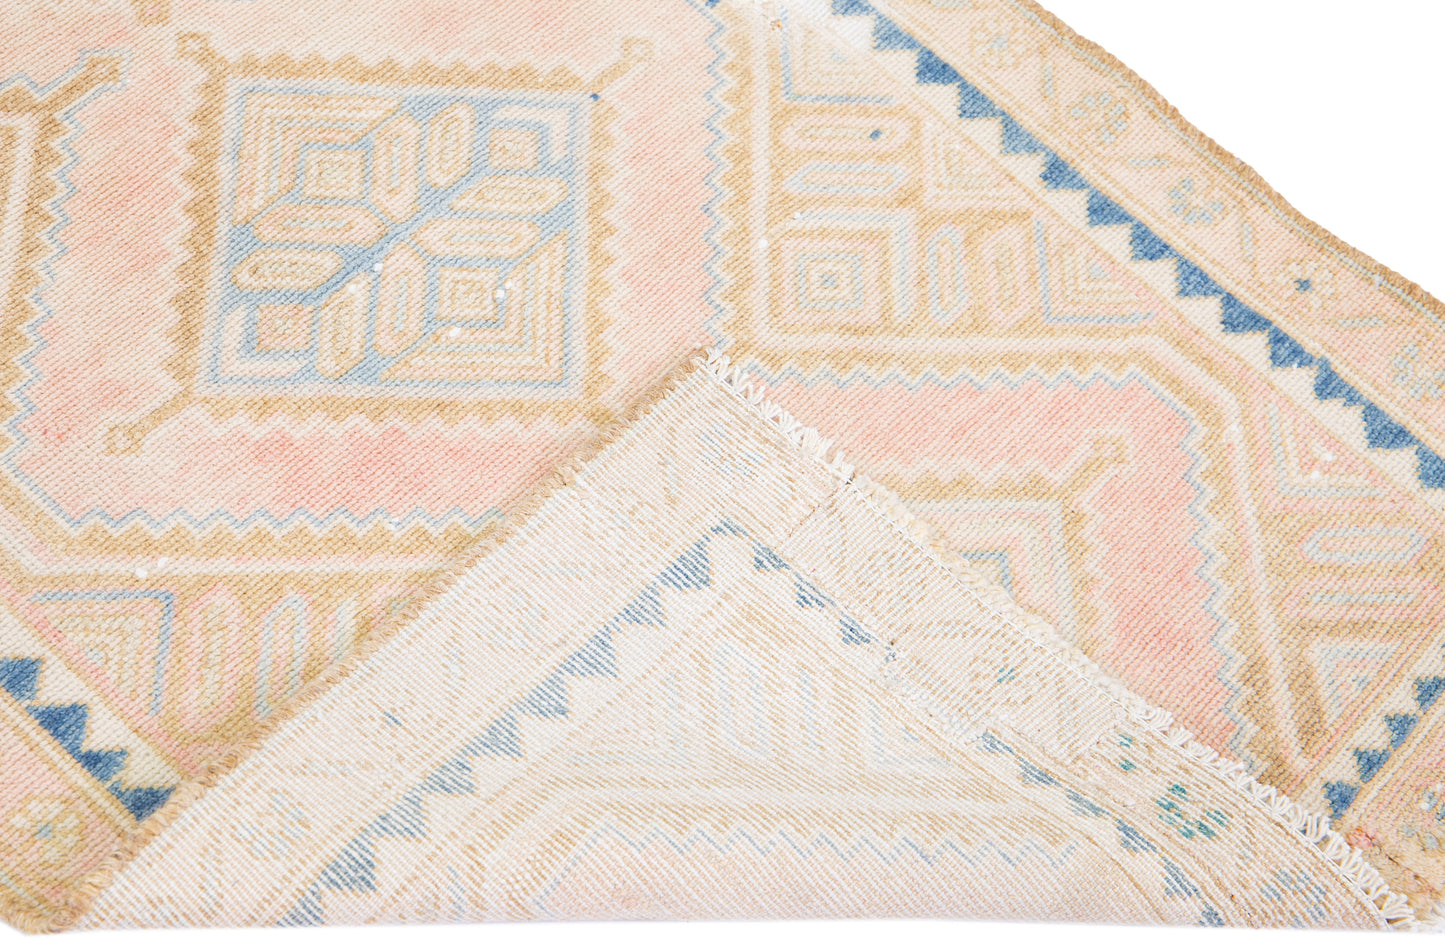 Close up of beige wool runner rug with repeating diamond motif